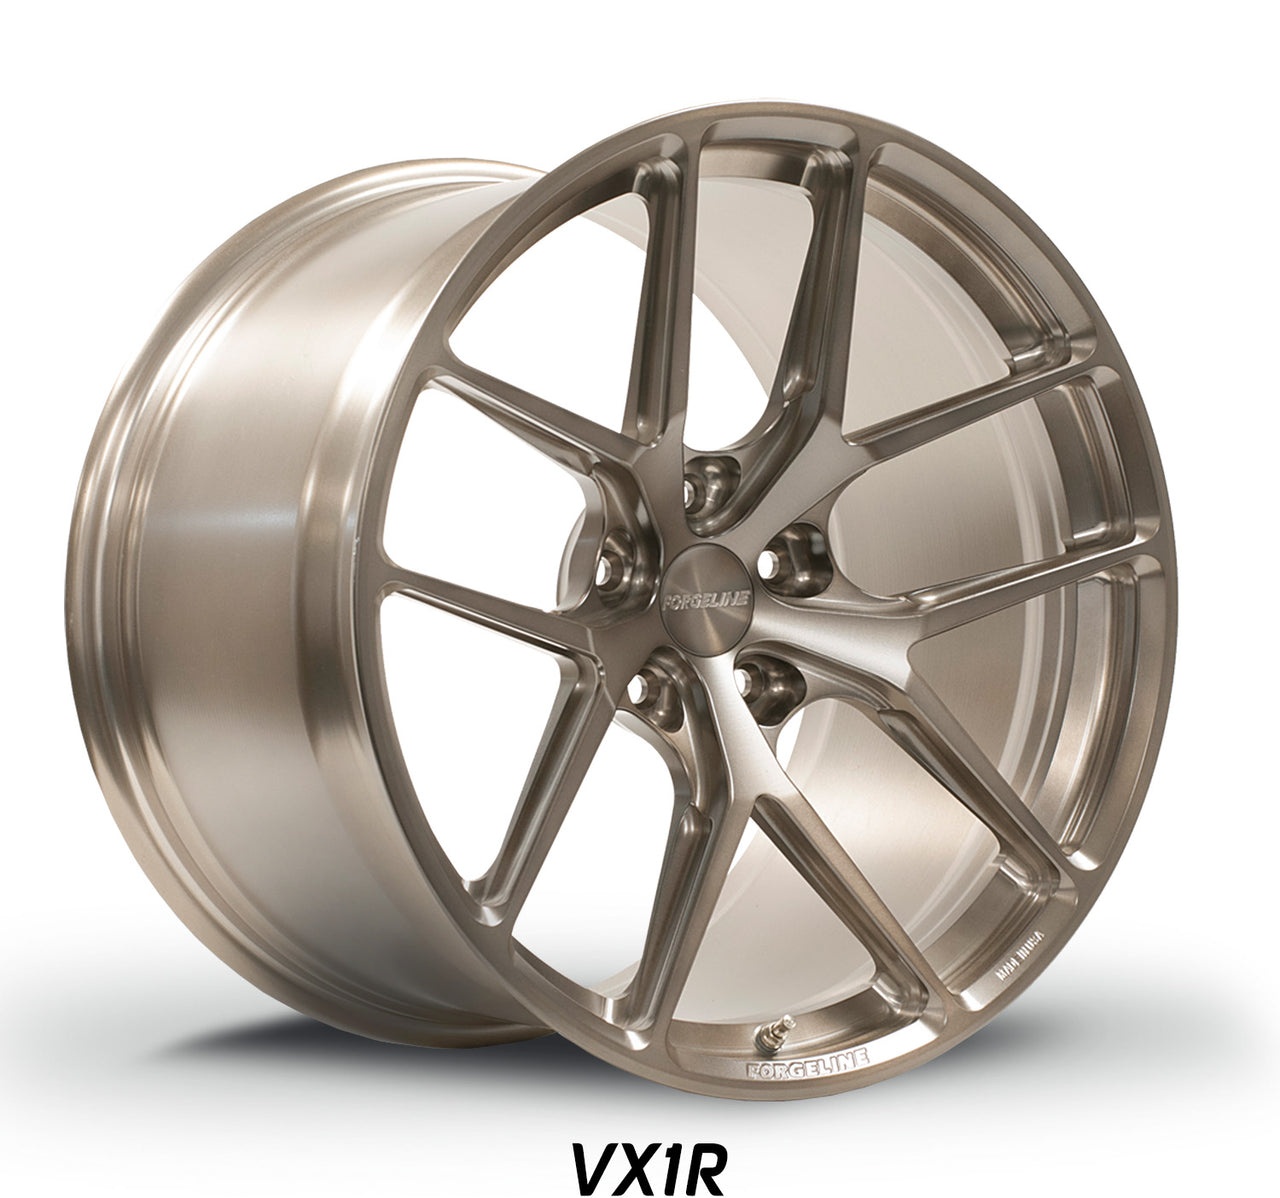 Satin Bronze Forgeline Wheels VX1R the most beautiful finishes in racing wheels.